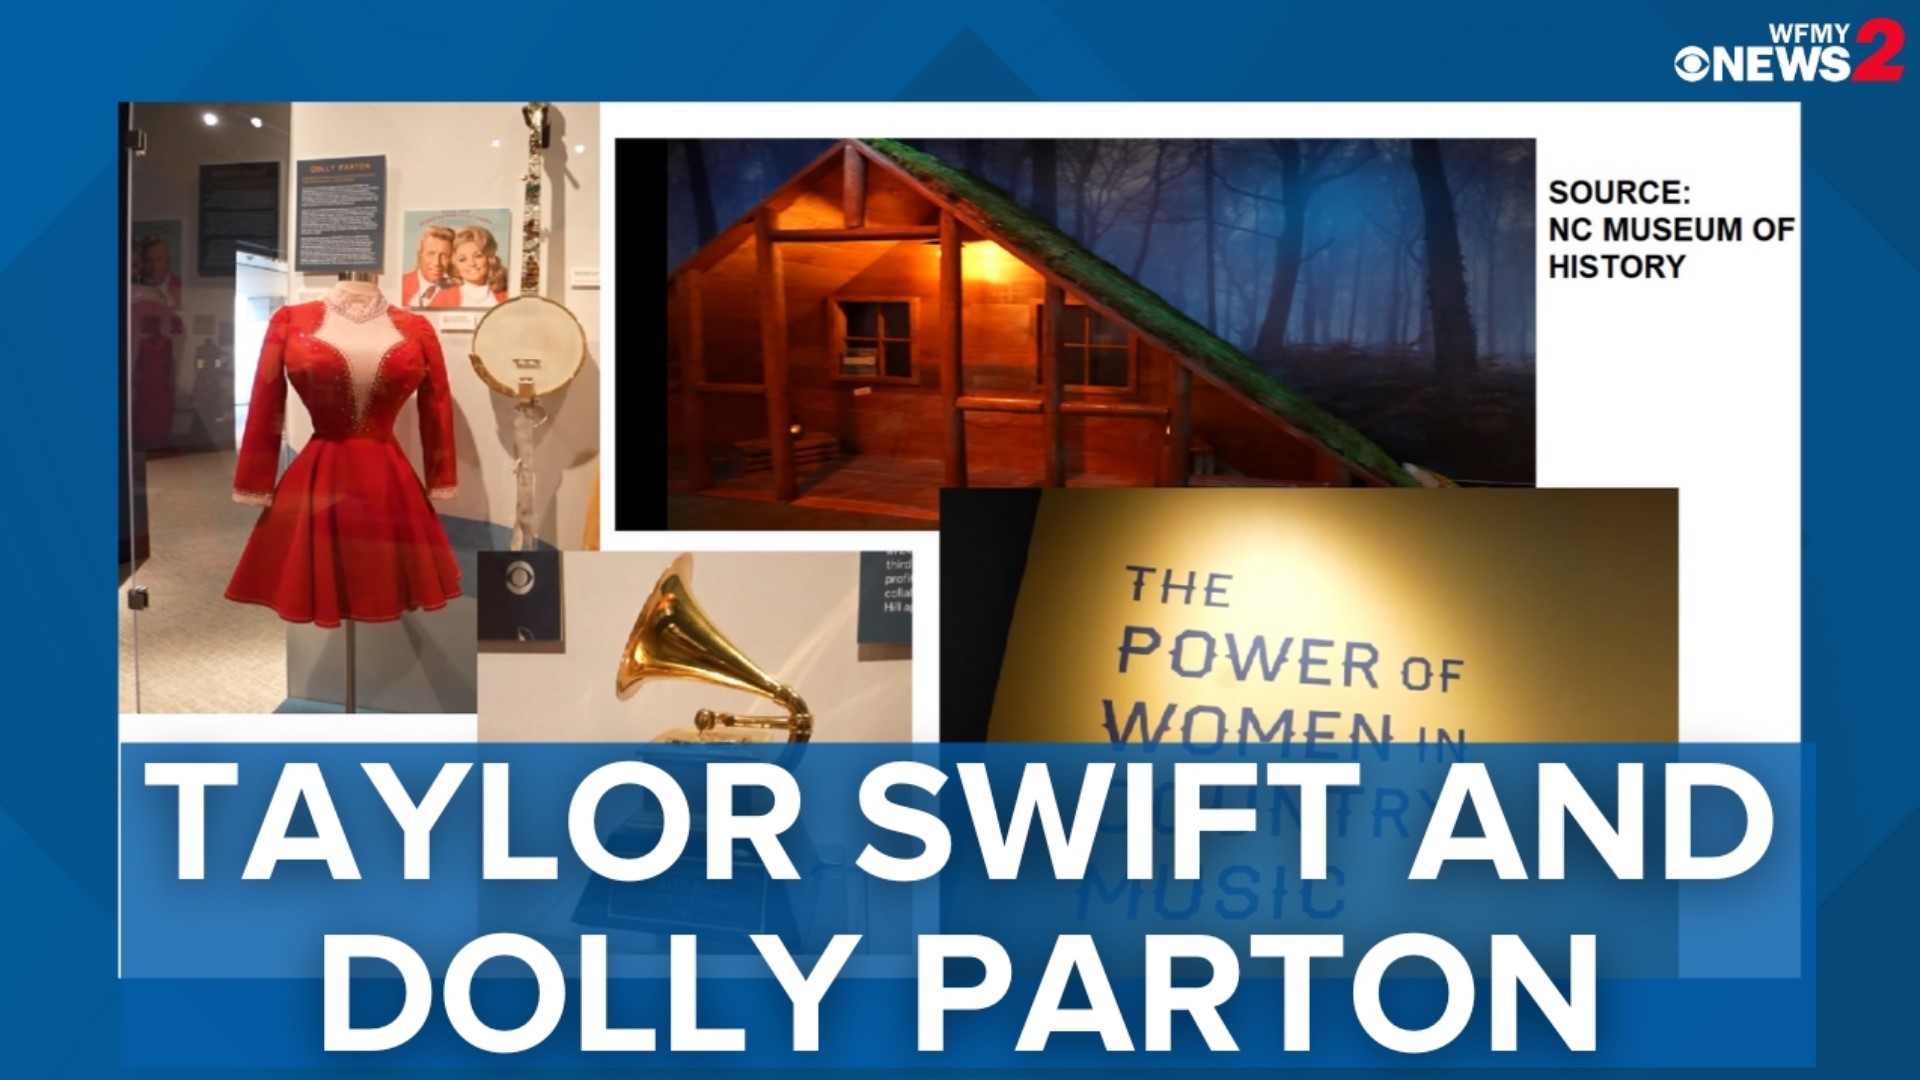 Taylor Swift, Dolly Parton: Girls of nation music at NC museum